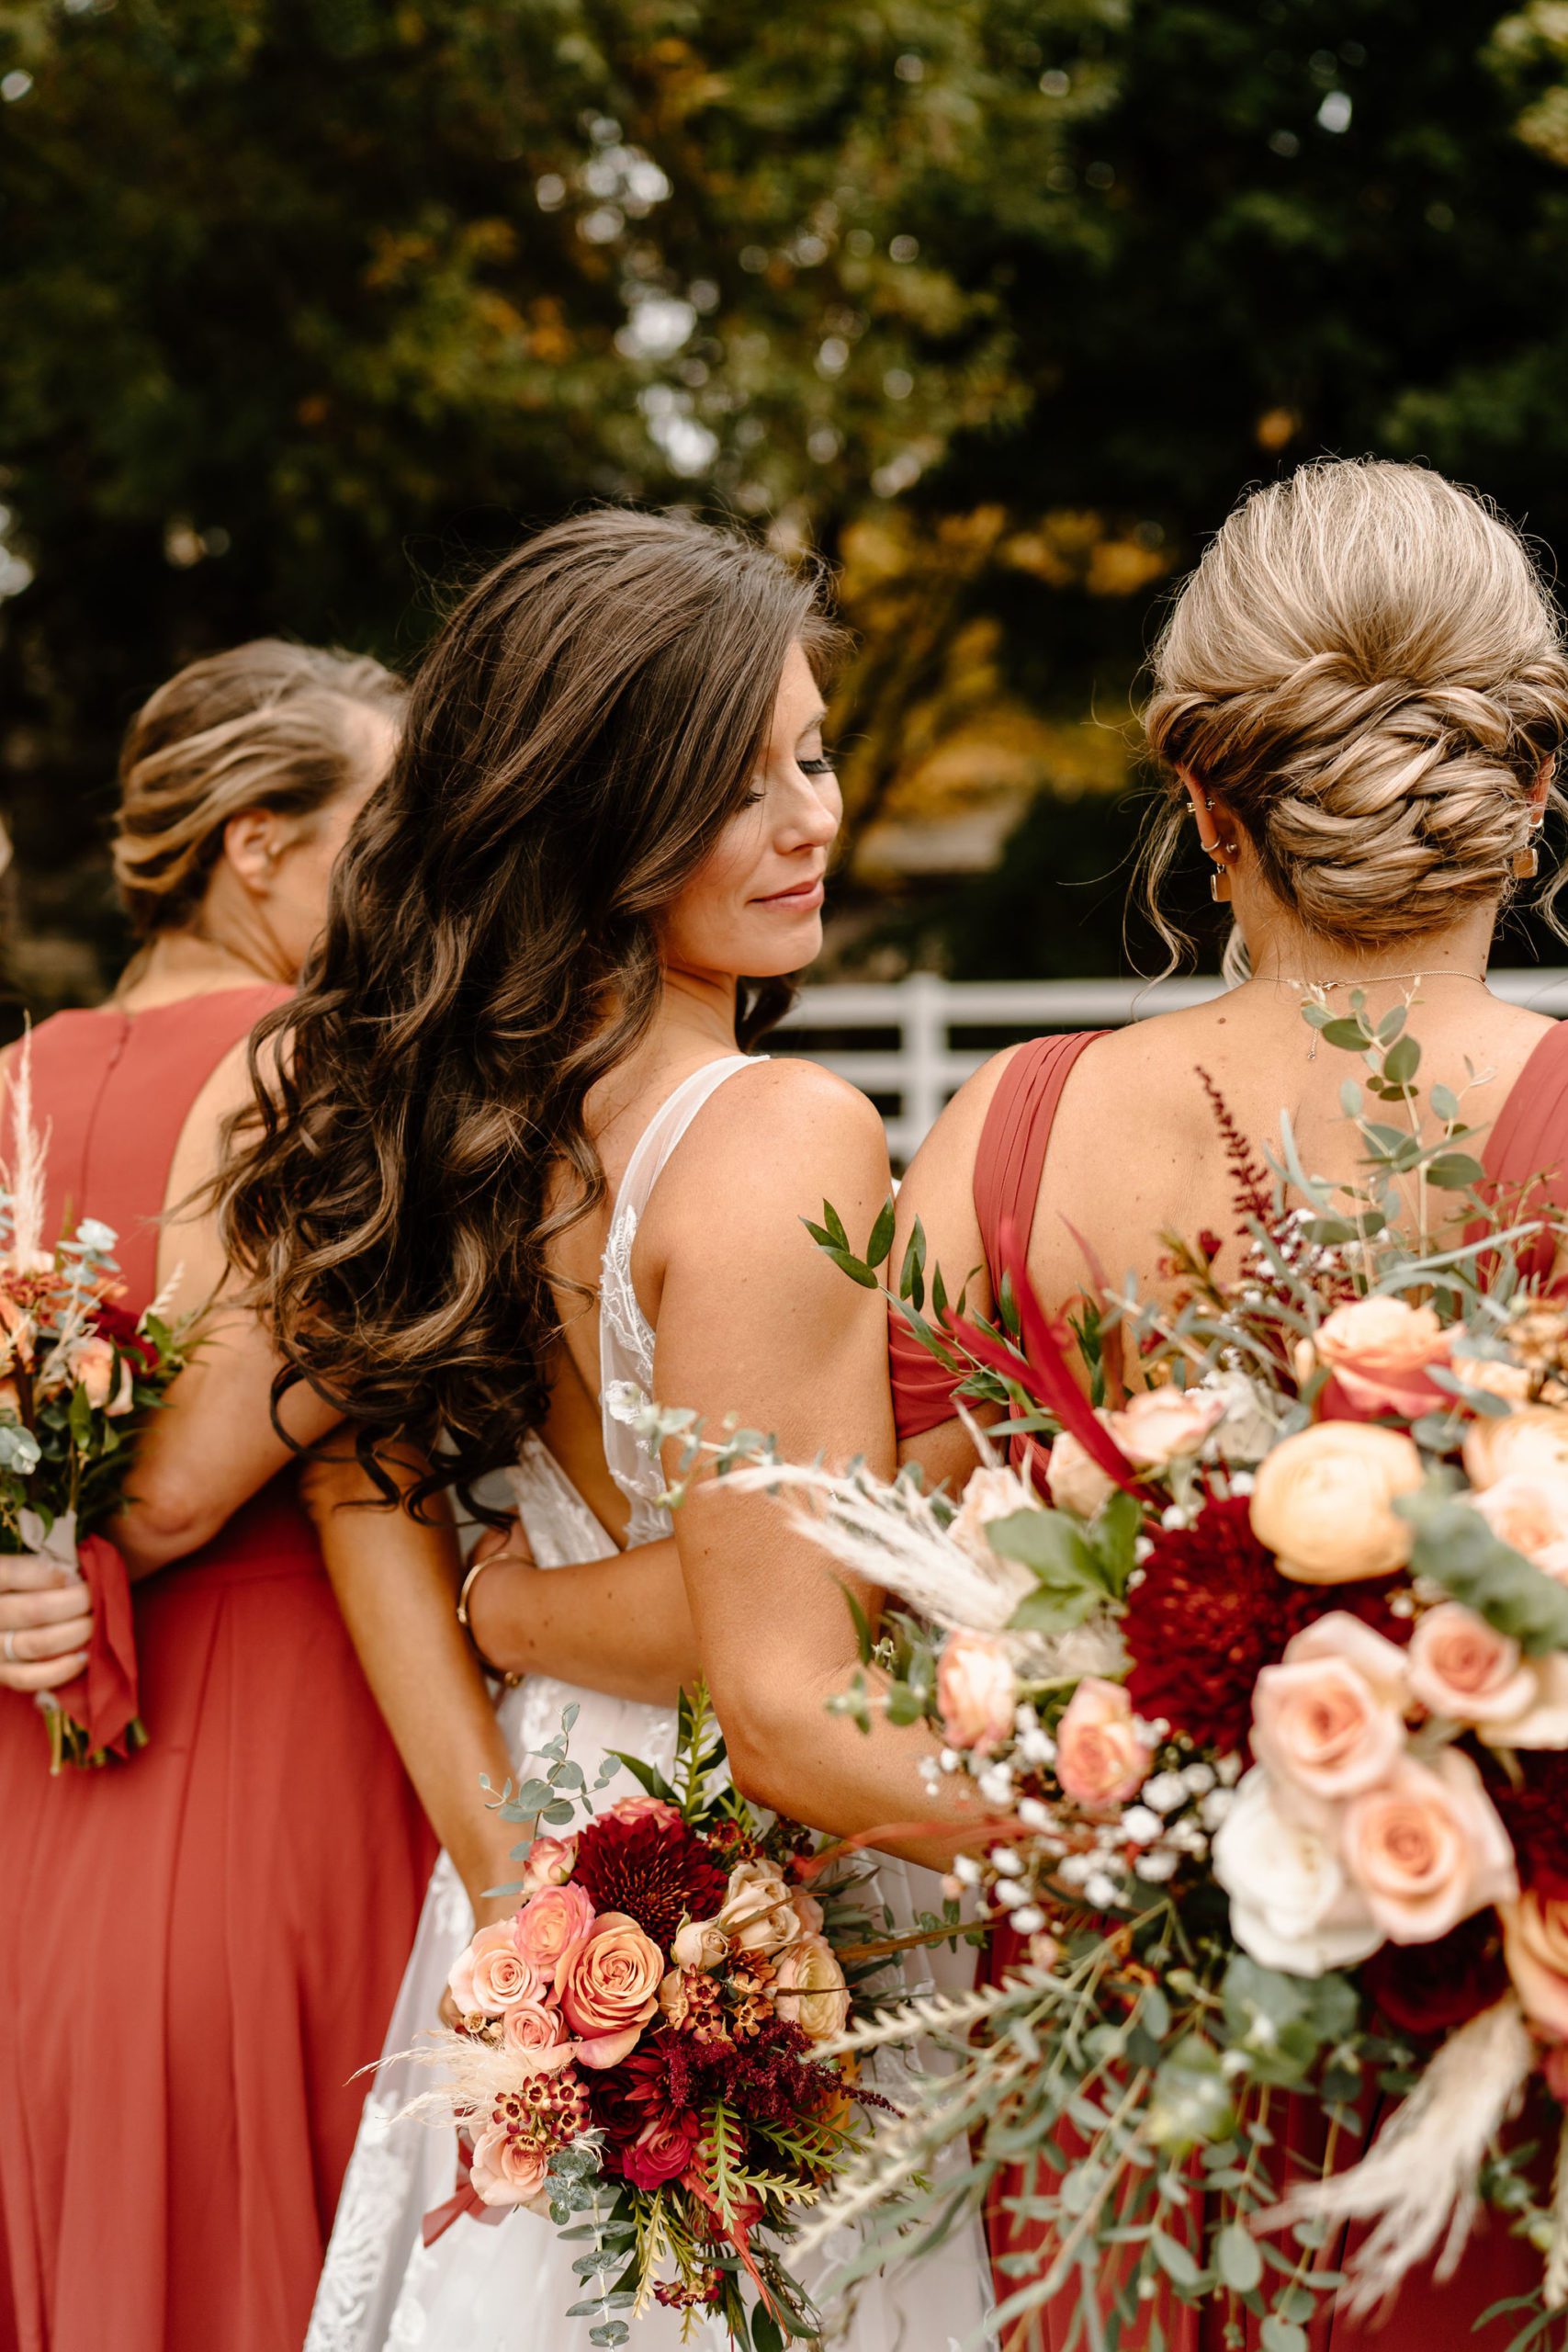 Wedding in North Carolina with bohemian colors and florals
